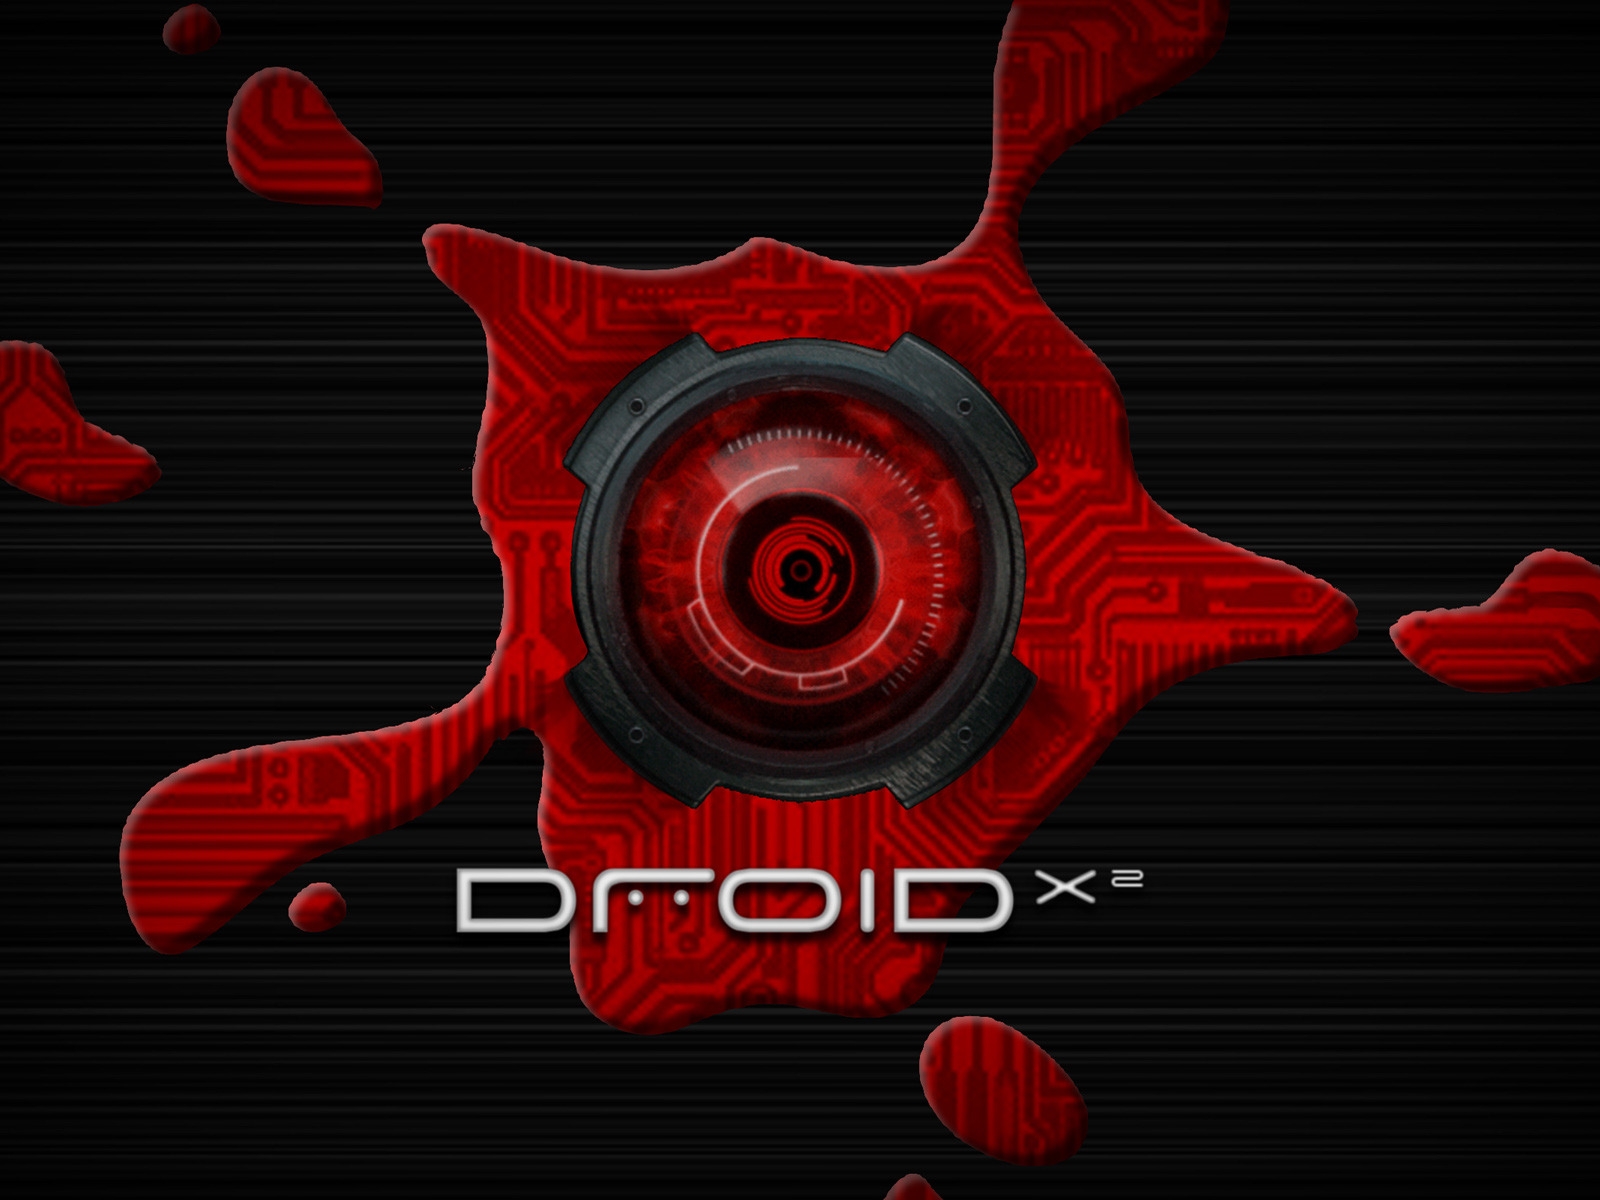 Droid X2 Splat for 1600 x 1200 resolution